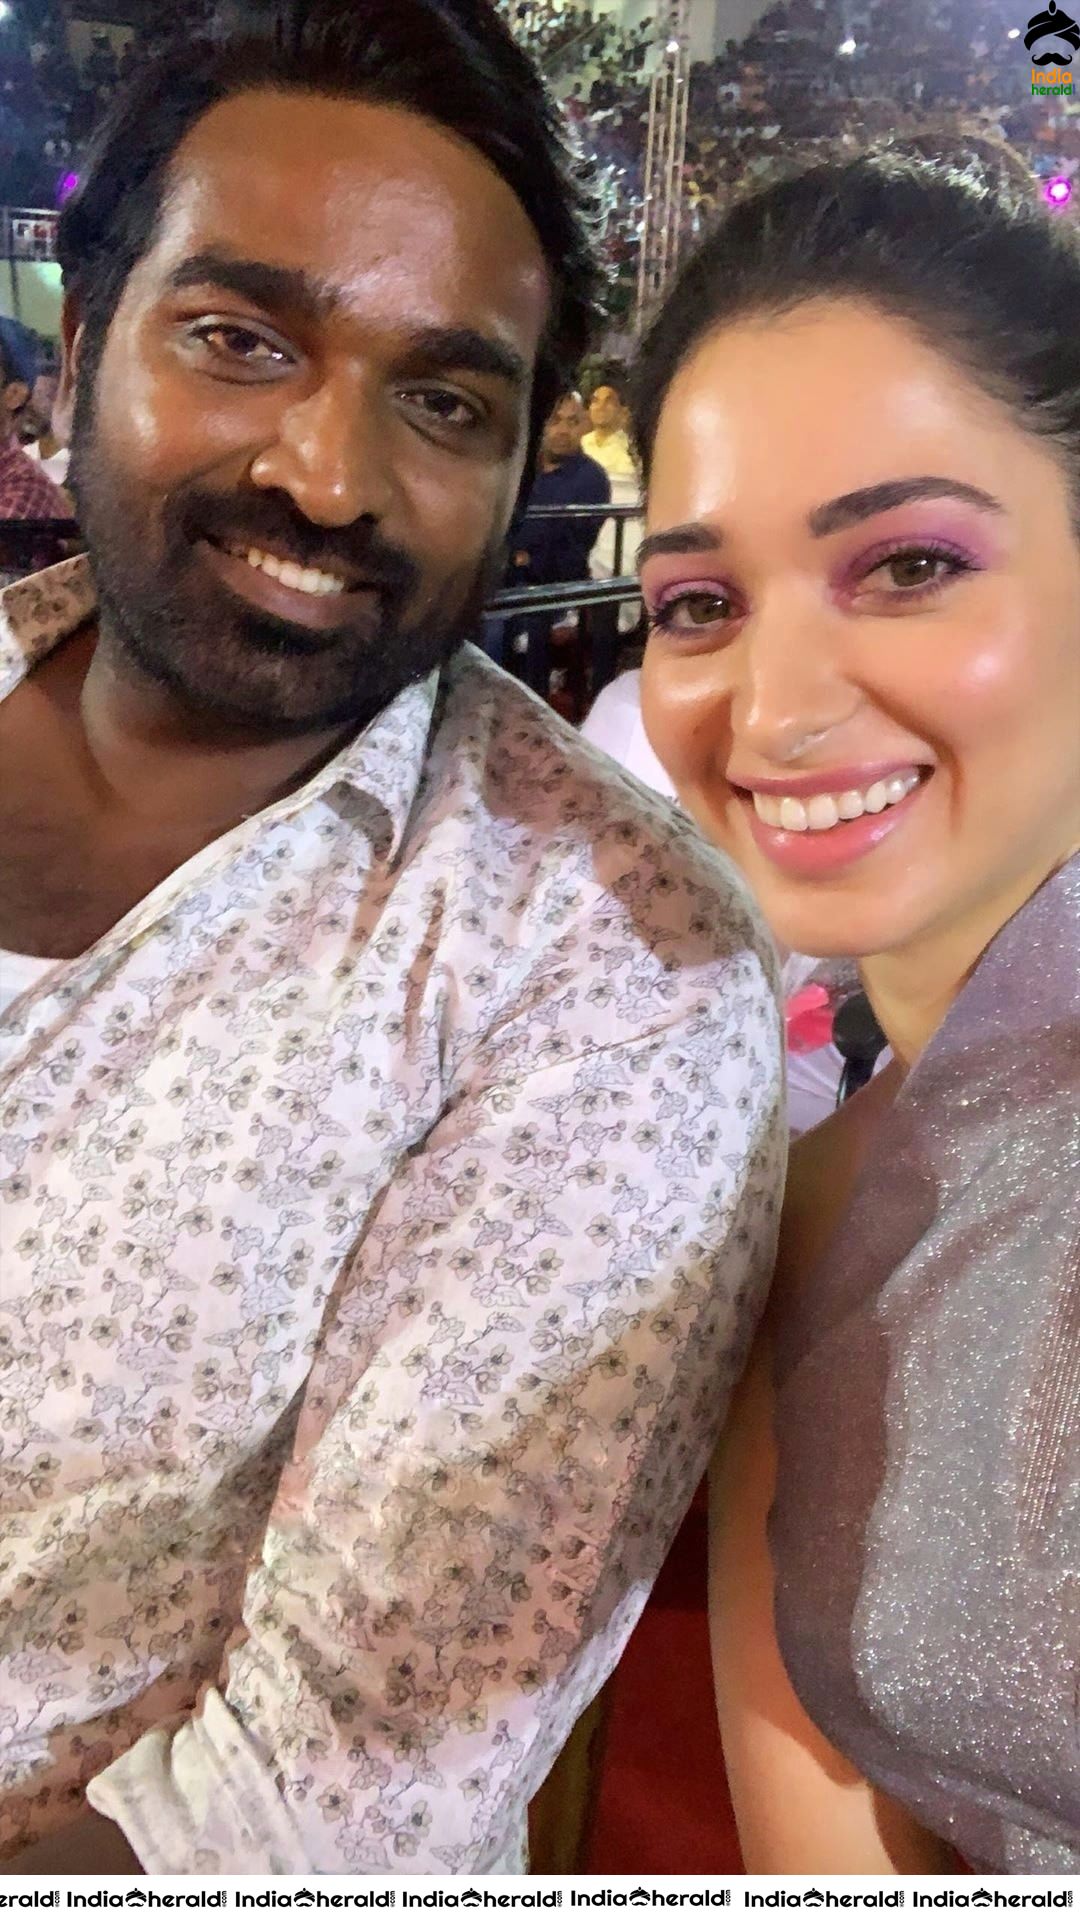 Tamannaah has a Fan Girl Moment as she took Selfies with Stalwarts in the Film Industry